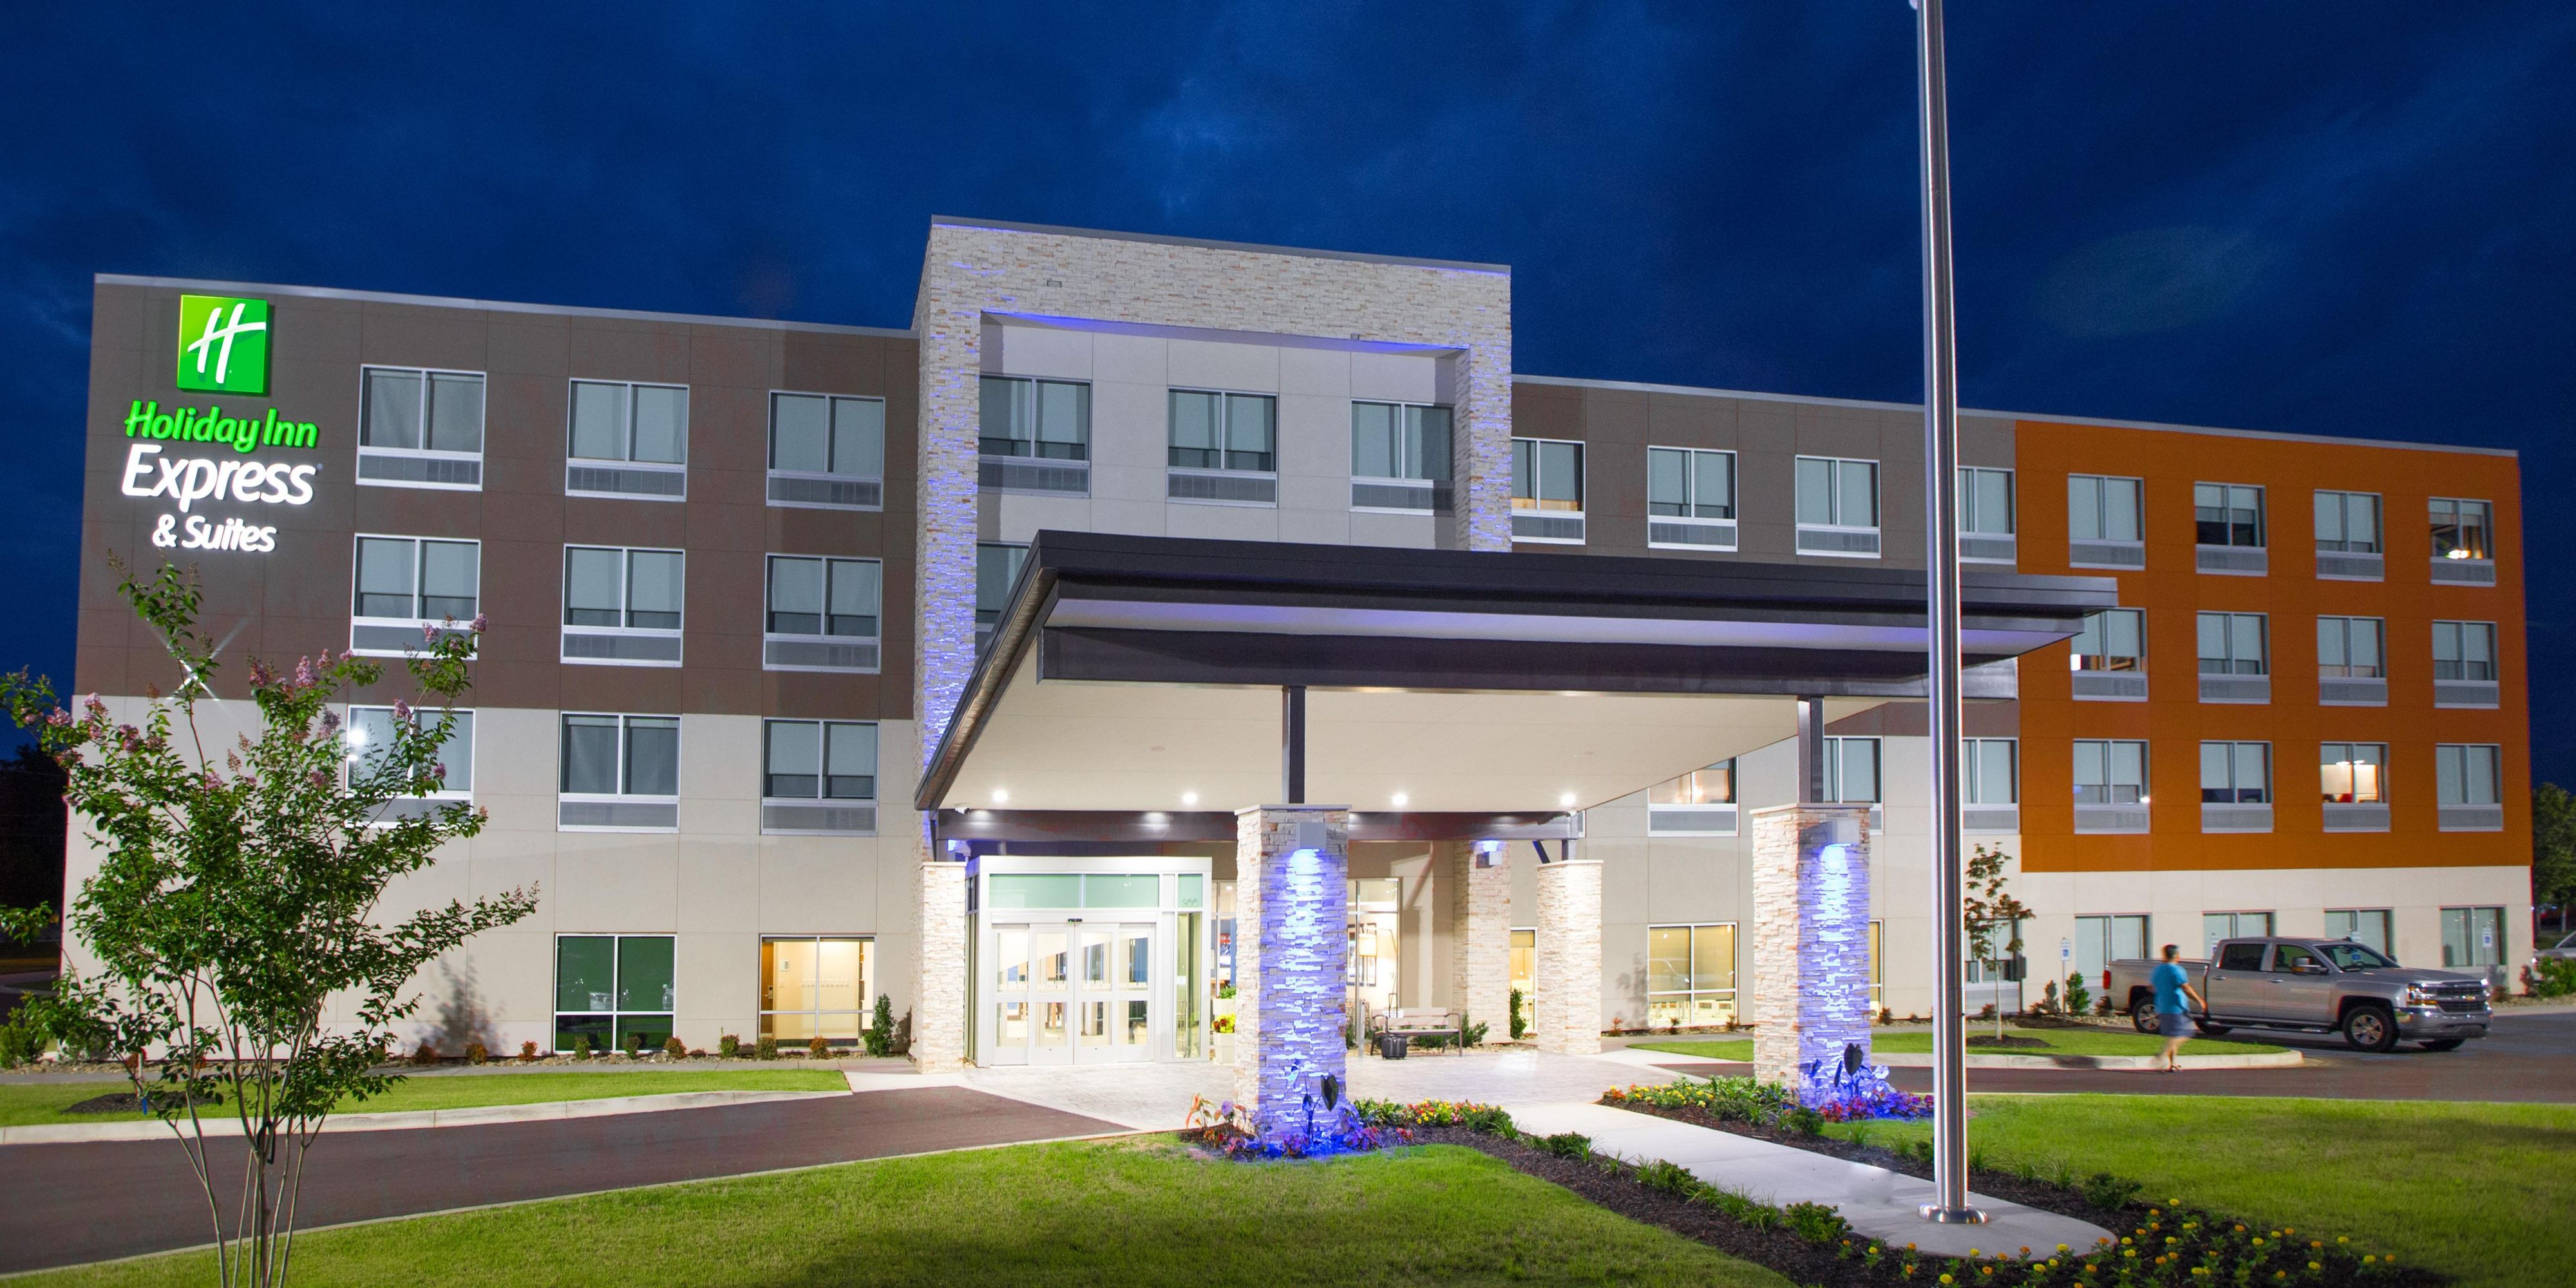 Our beautiful new hotel can accommodate your wedding guest room needs. We are located close to the Greenwood downtown area where your guests can enjoy all Greenwood has to offer. Close to theaters, restaurants and so much more.